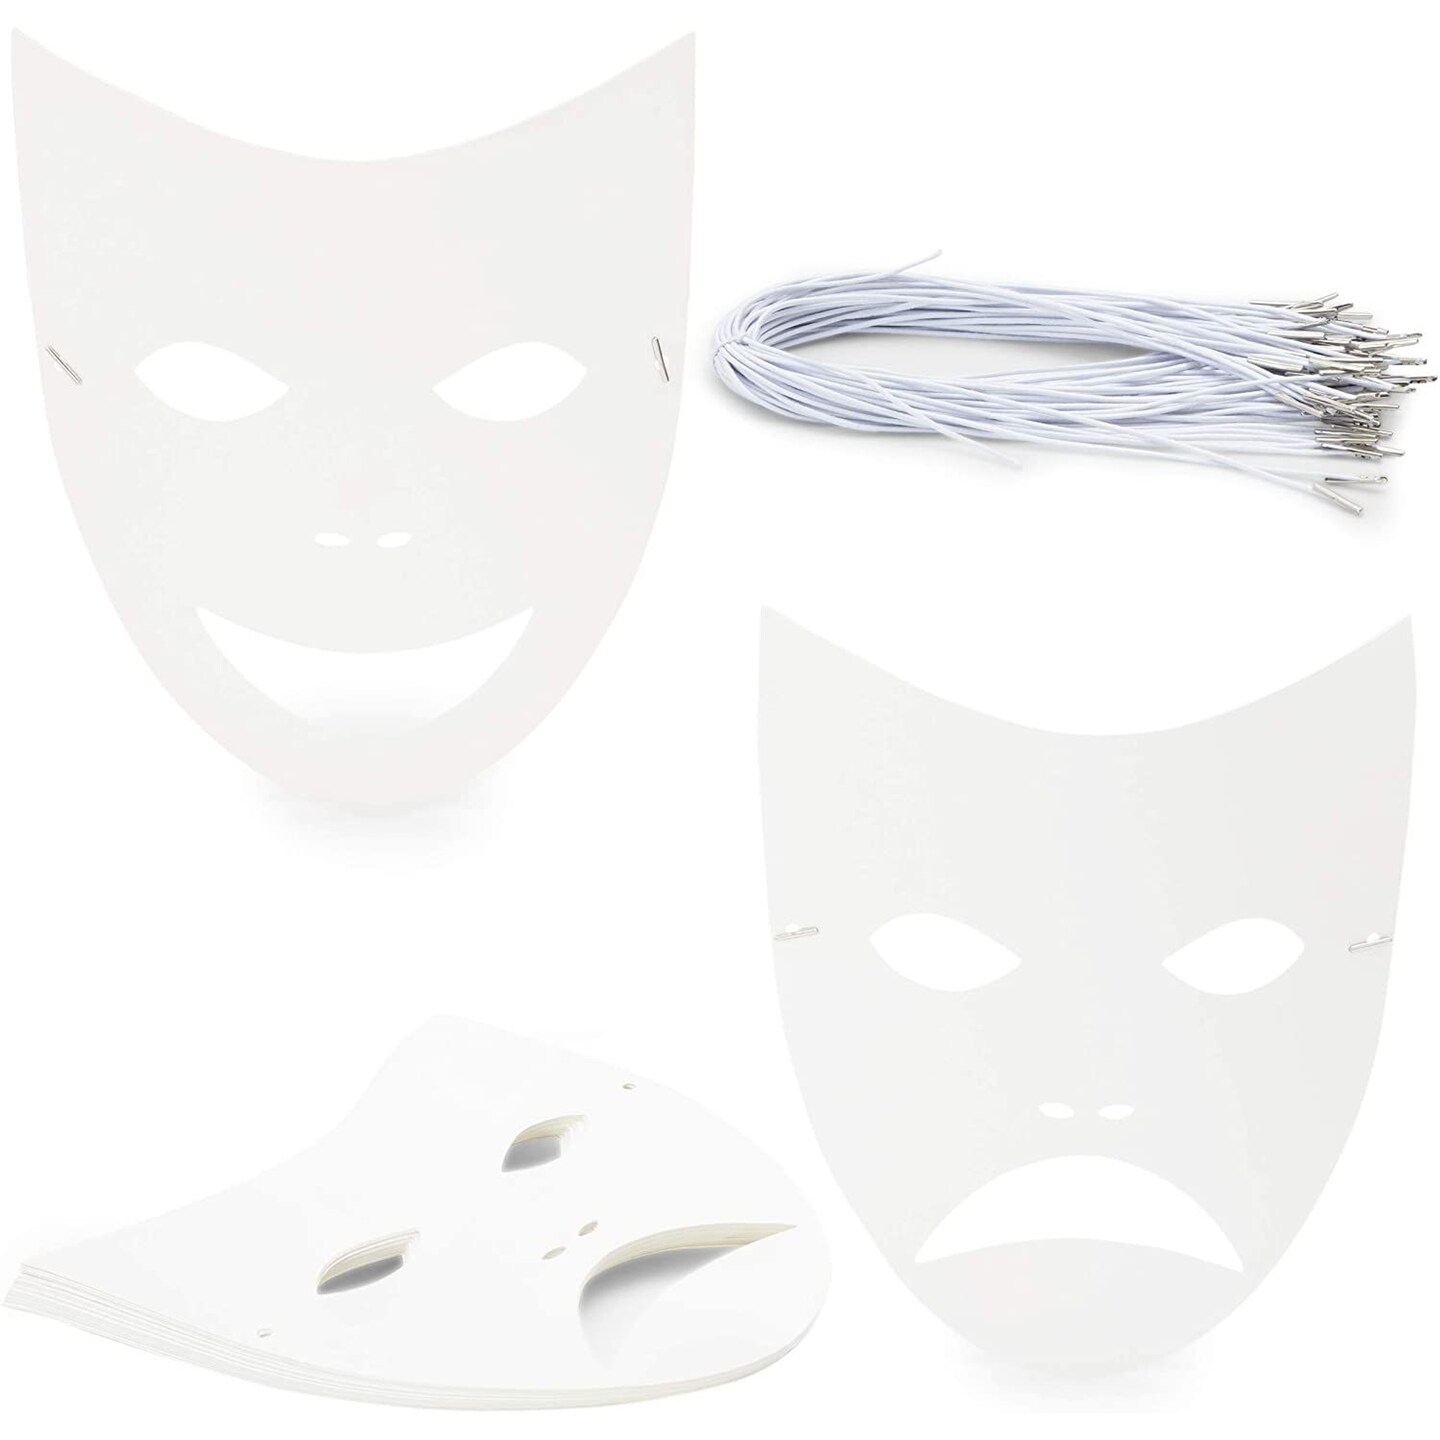 Masks on for our Halloween Masquerade Party  Masquerade halloween party,  Masquerade halloween party decorations, Masquerade party decorations